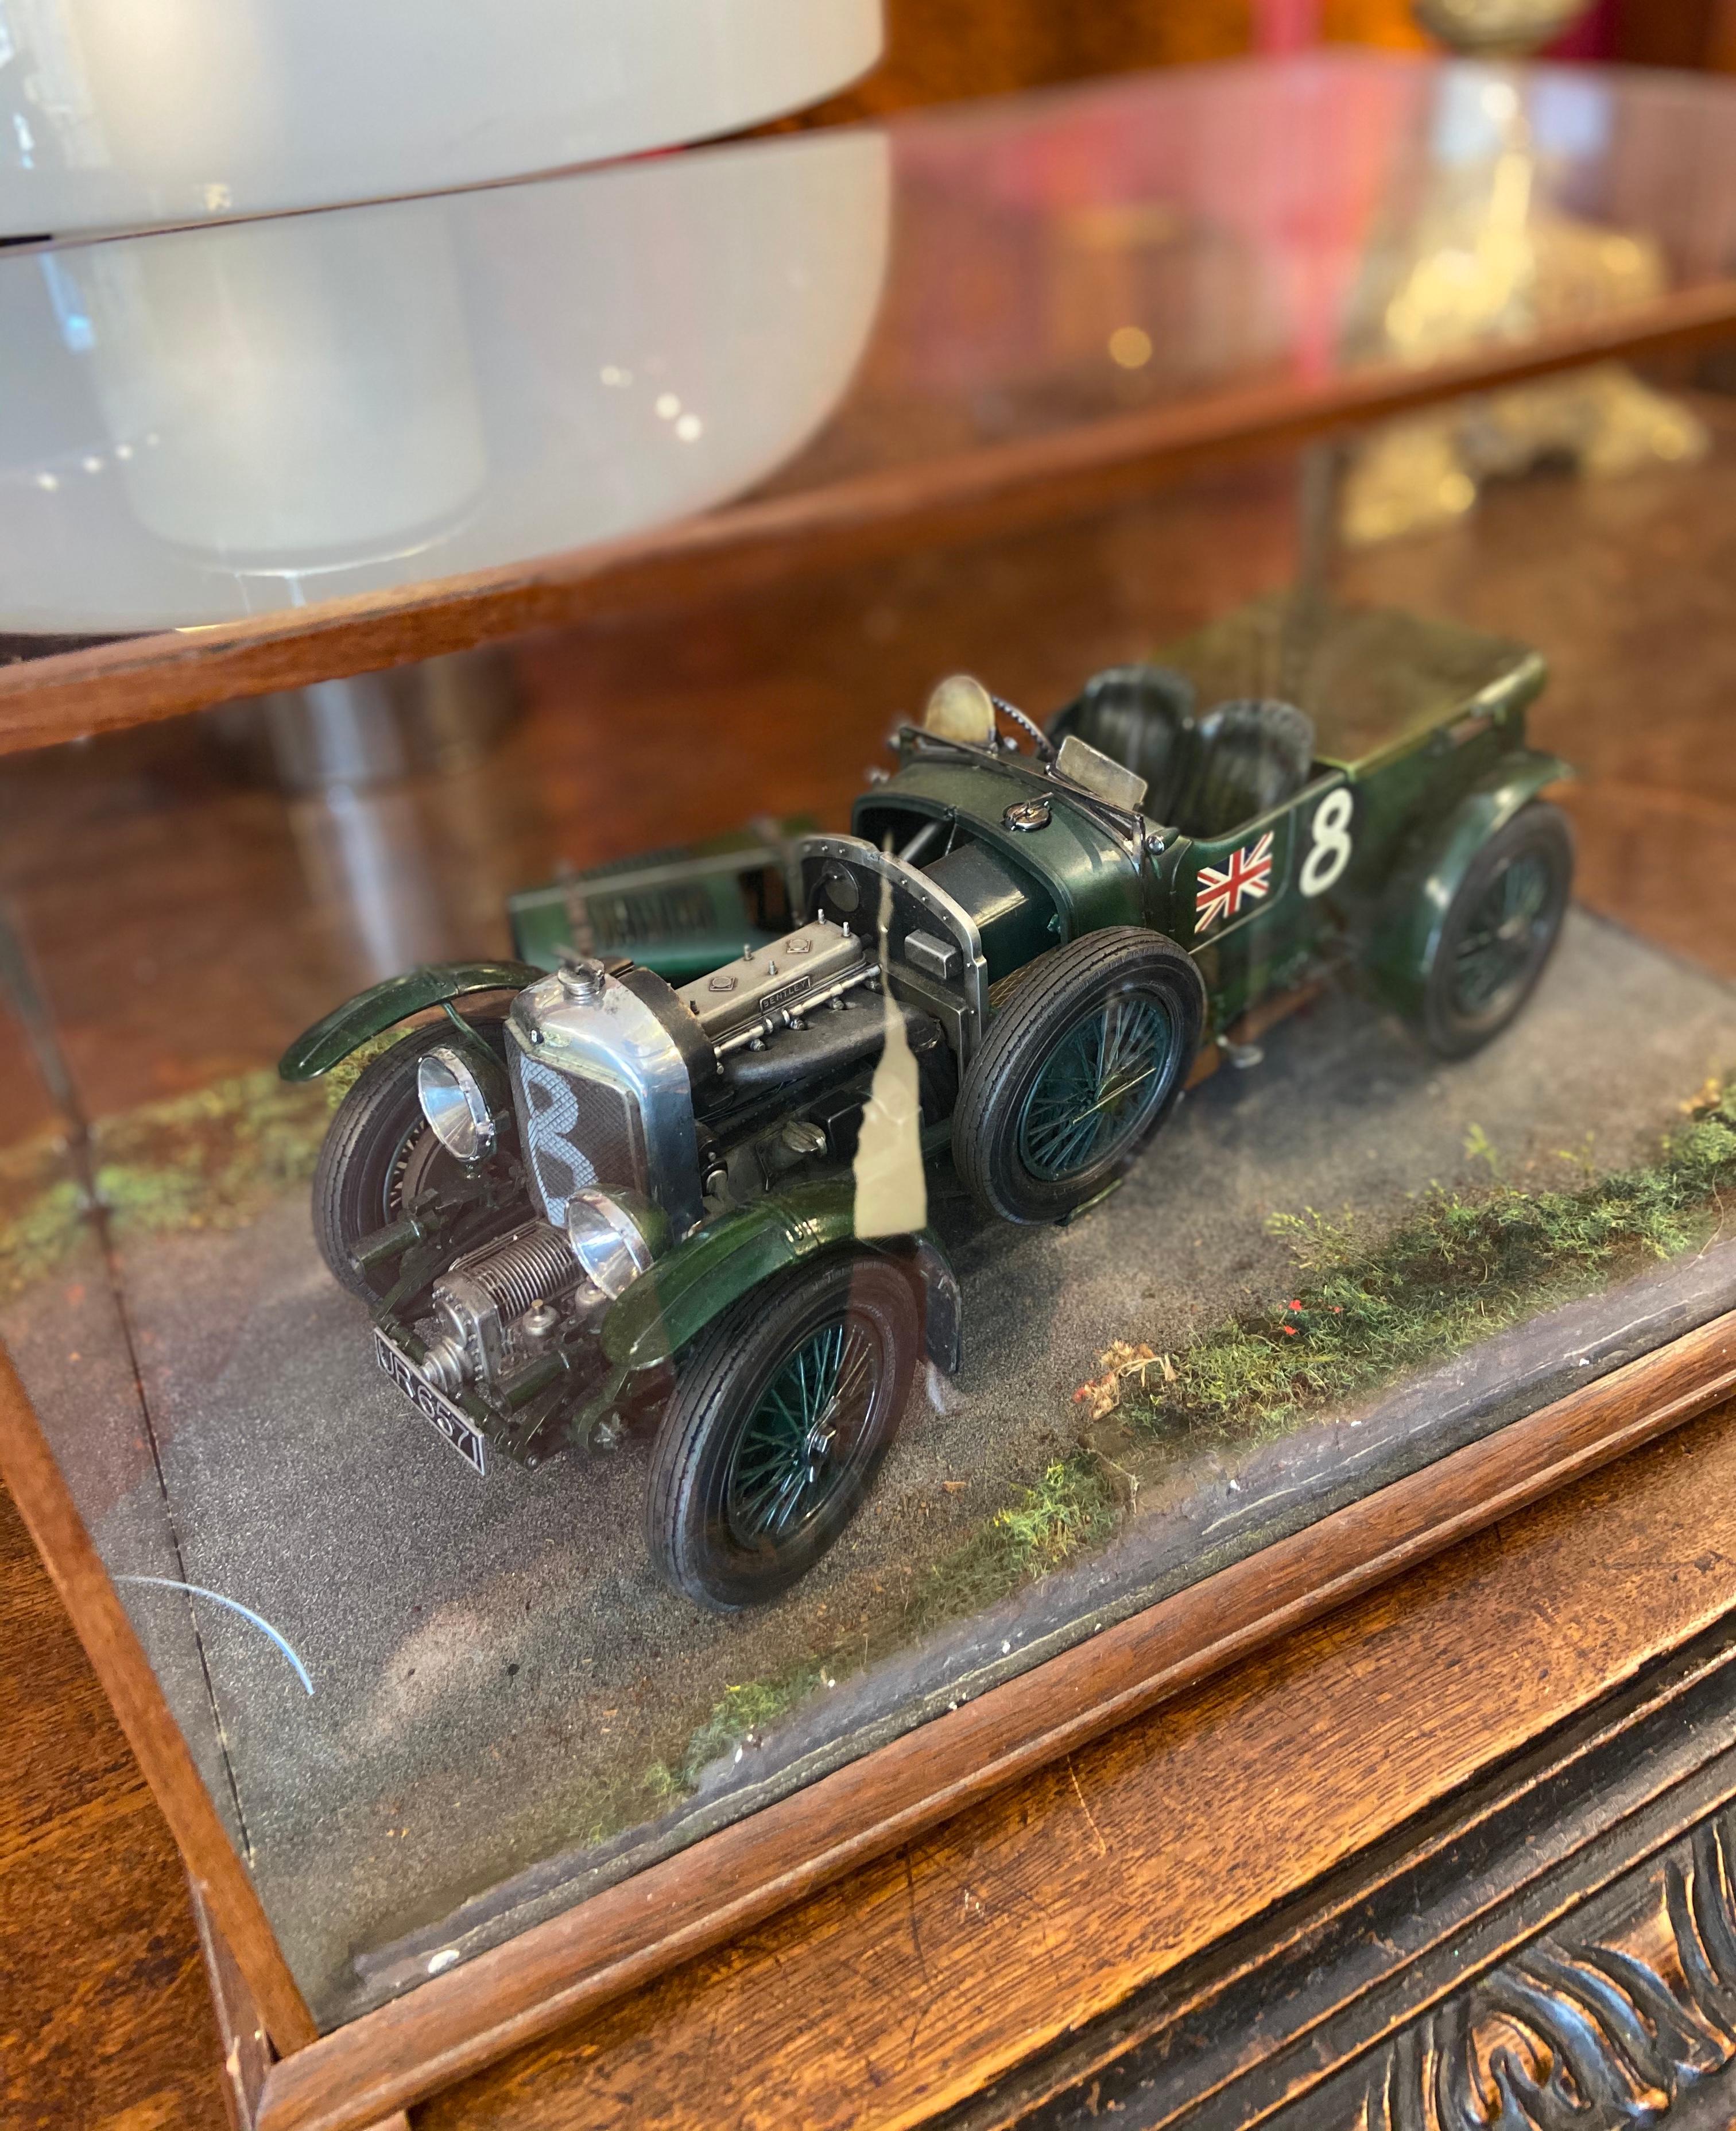 A beautiful kit built model of a 1930 'Blower' Bentley 4.5l racing car in 1:12 scale.

It is primarily of plastic construction and is attached to a wooden base with glazed removable cover.

This model was hand painted by one of the artists who